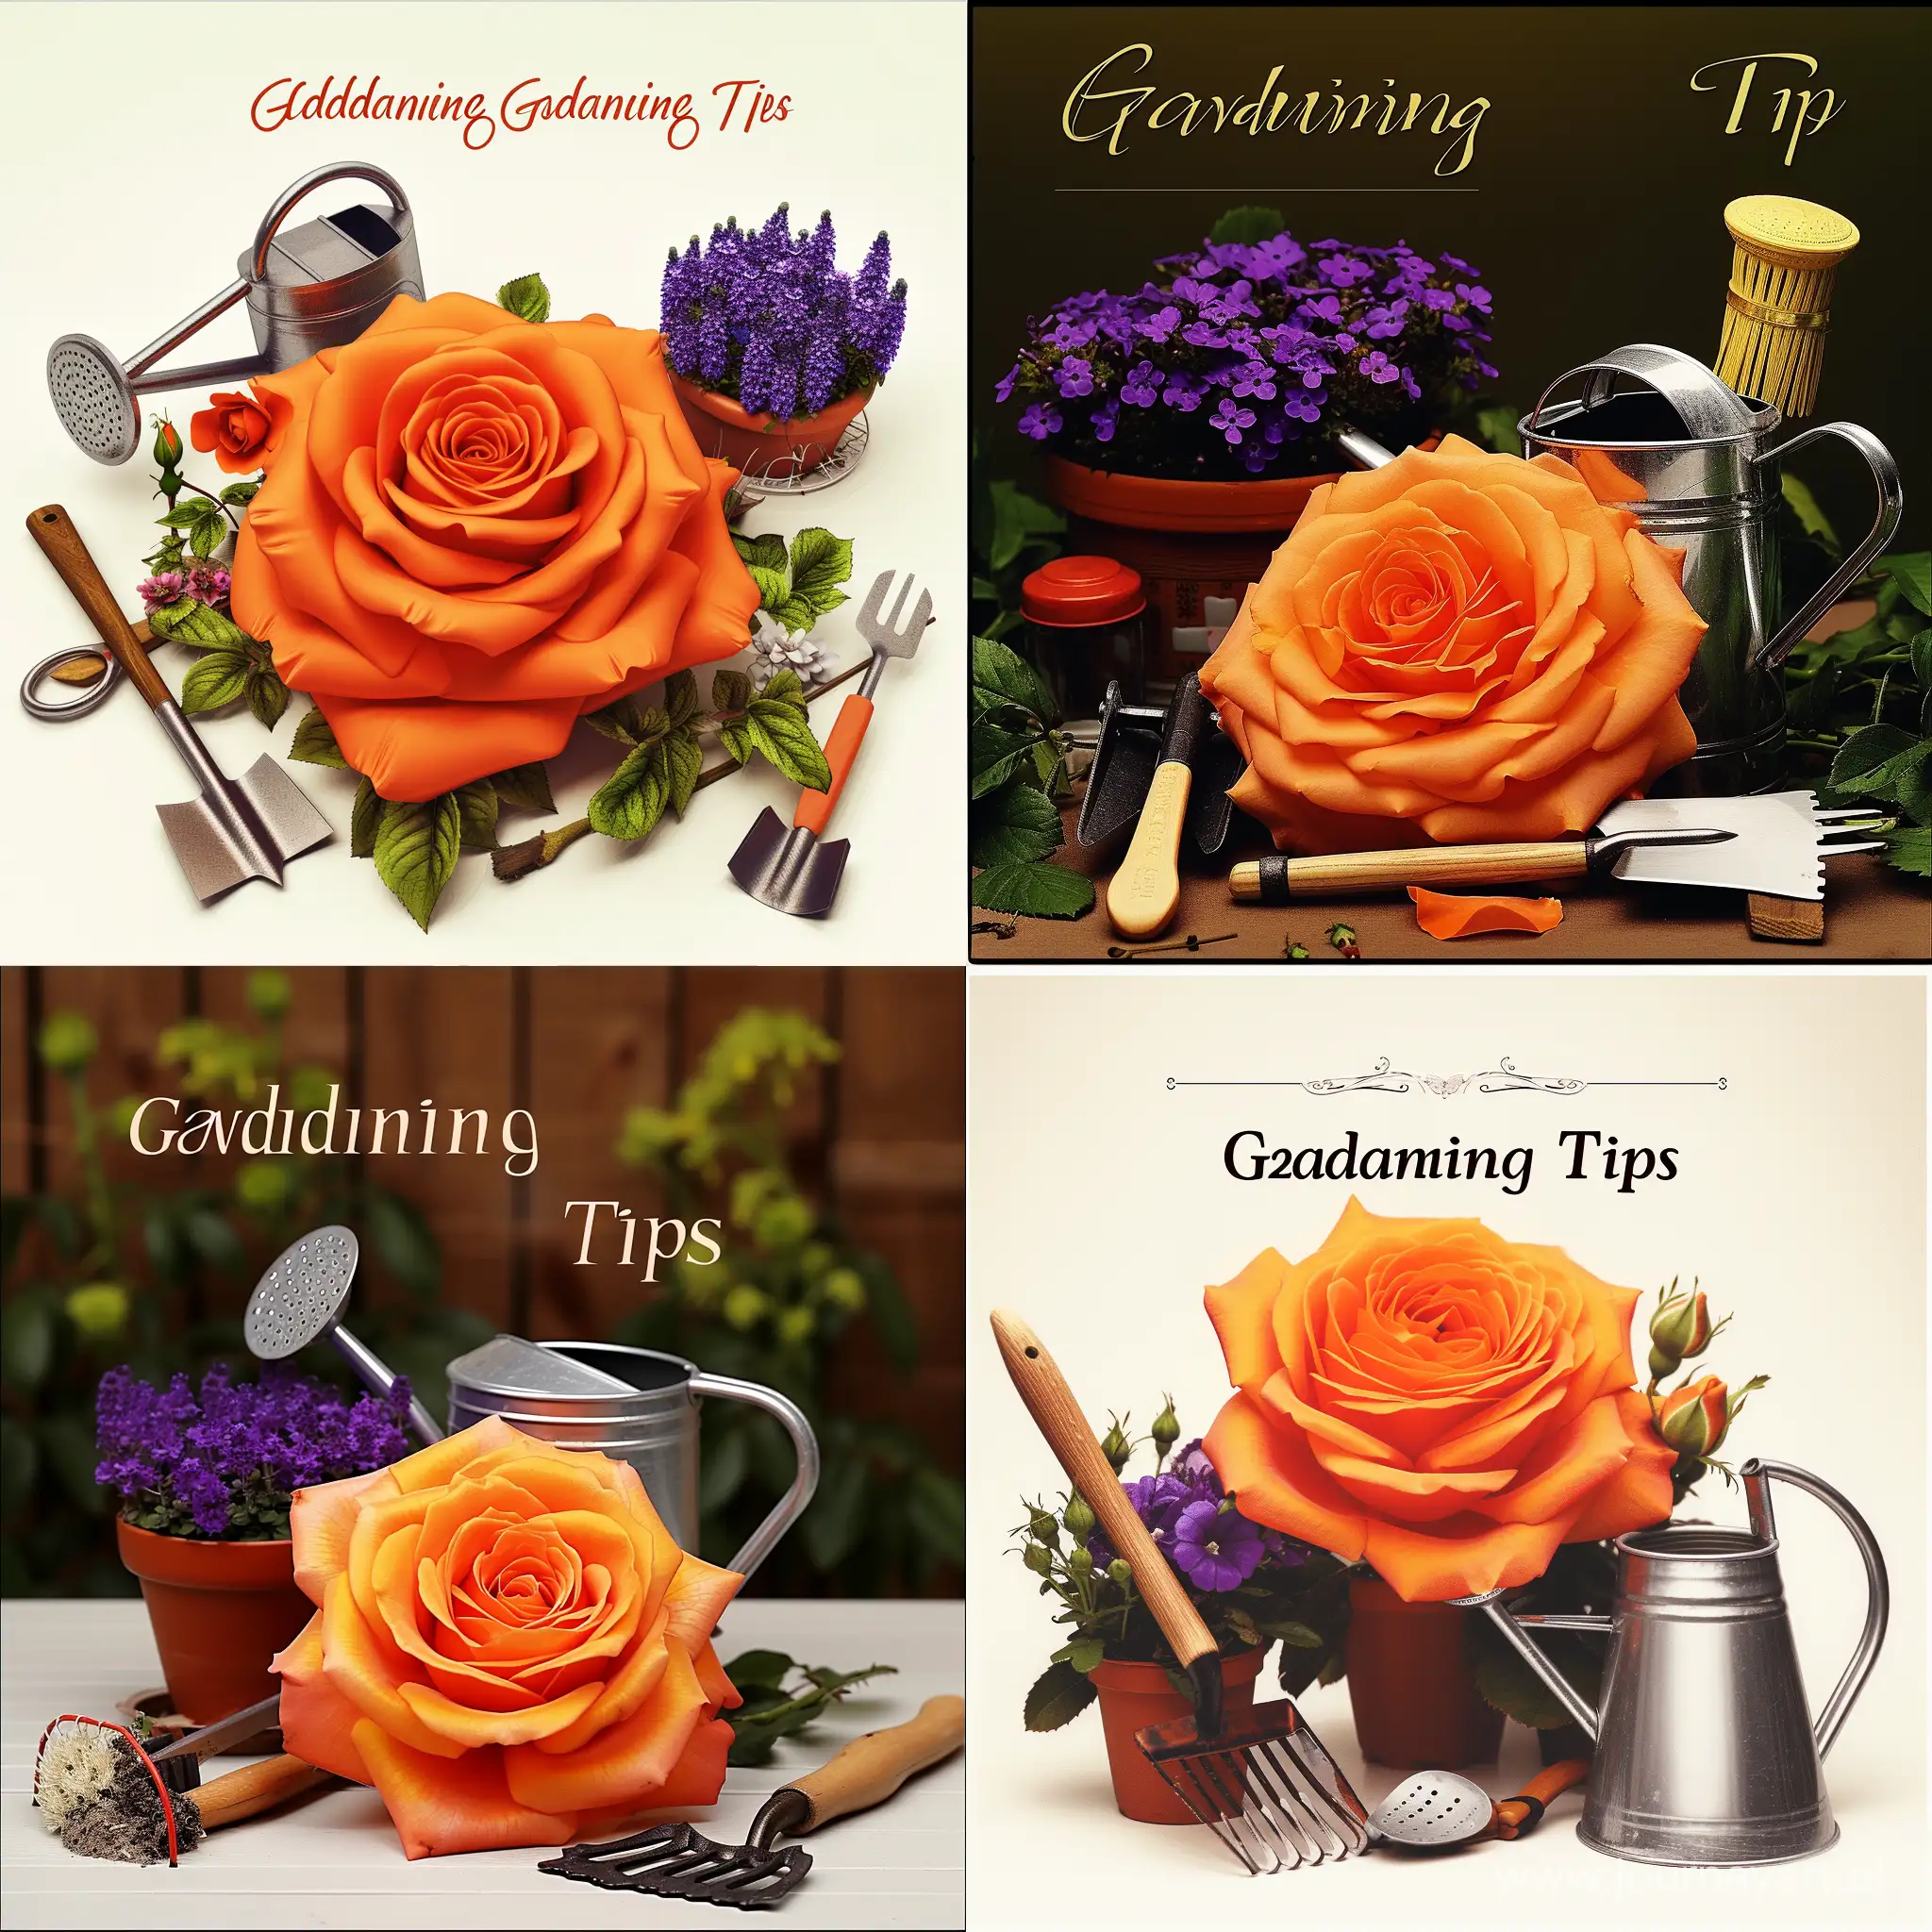 an orange rose with a couple of gardening items like a watering can, fork, hoe and a pot of purple flowers, the words "Gardening Tips" on the picture